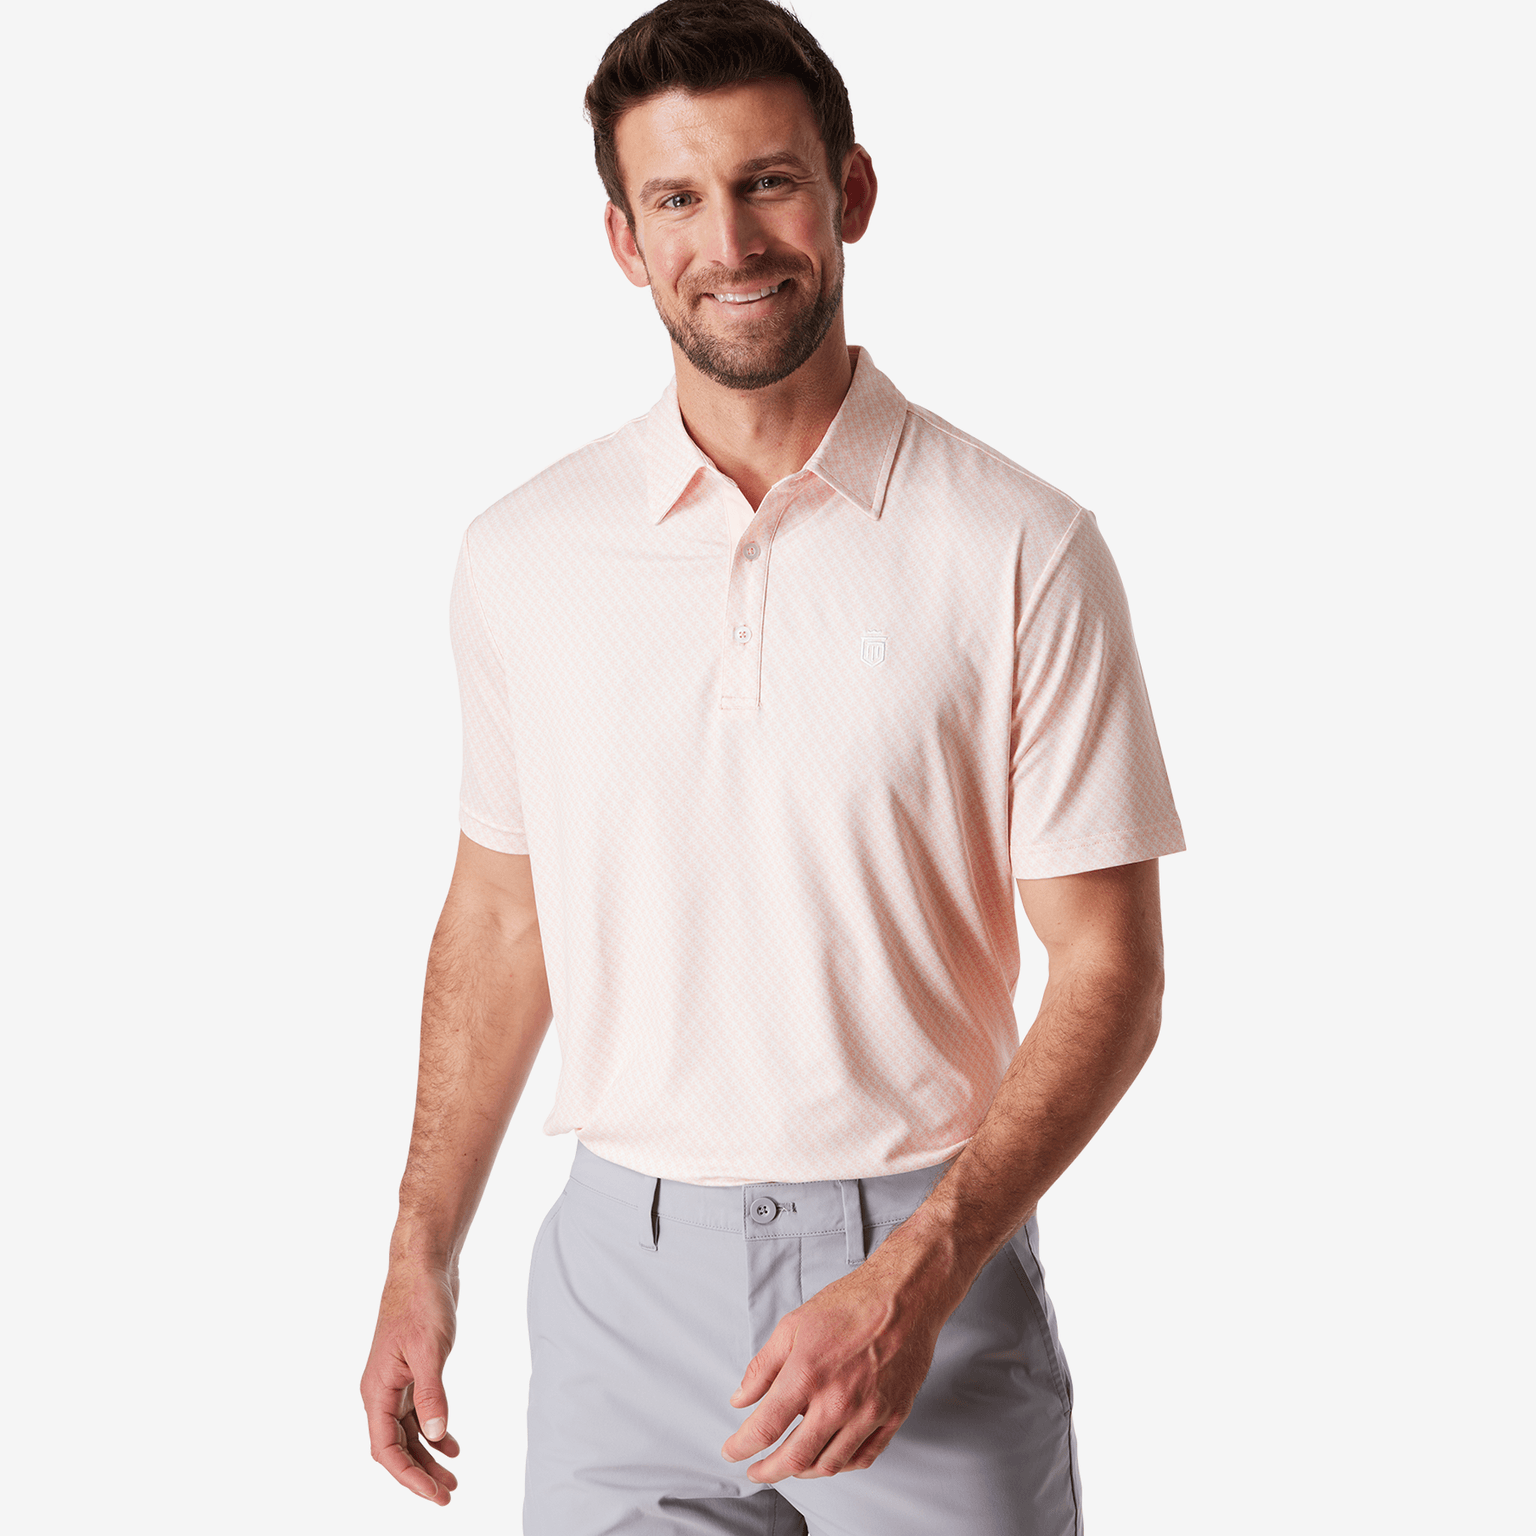 Athletic Tech Printed Polo